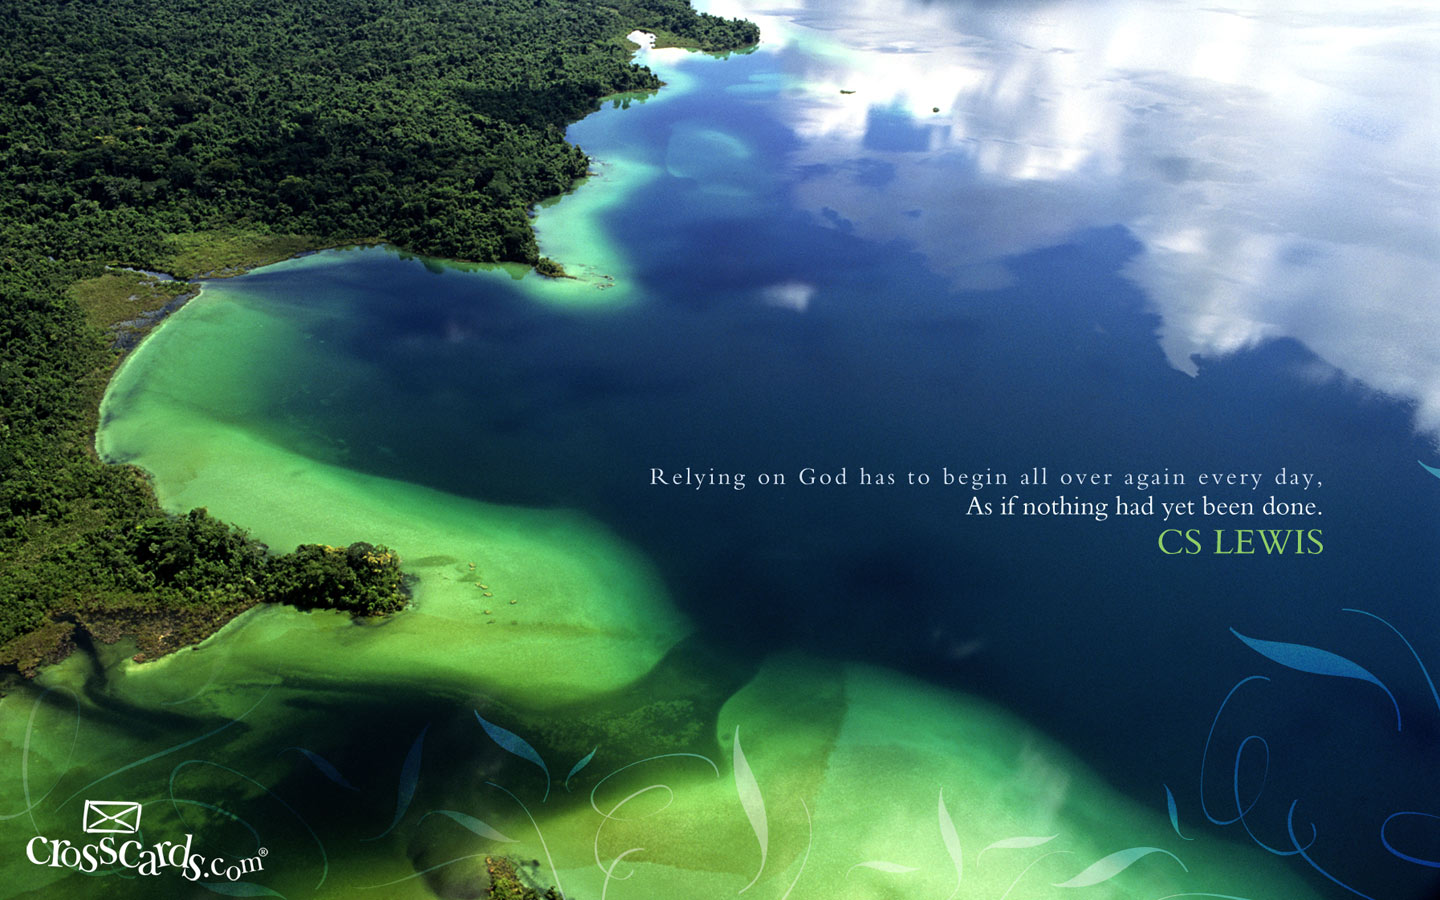 Free download Relying on God Wallpaper Christian Wallpaper and Background [1440x900] for your Desktop, Mobile & Tablet. Explore Free Christian Wallpaper. Christian Wallpaper With Bible Verses, Religious Wallpaper for